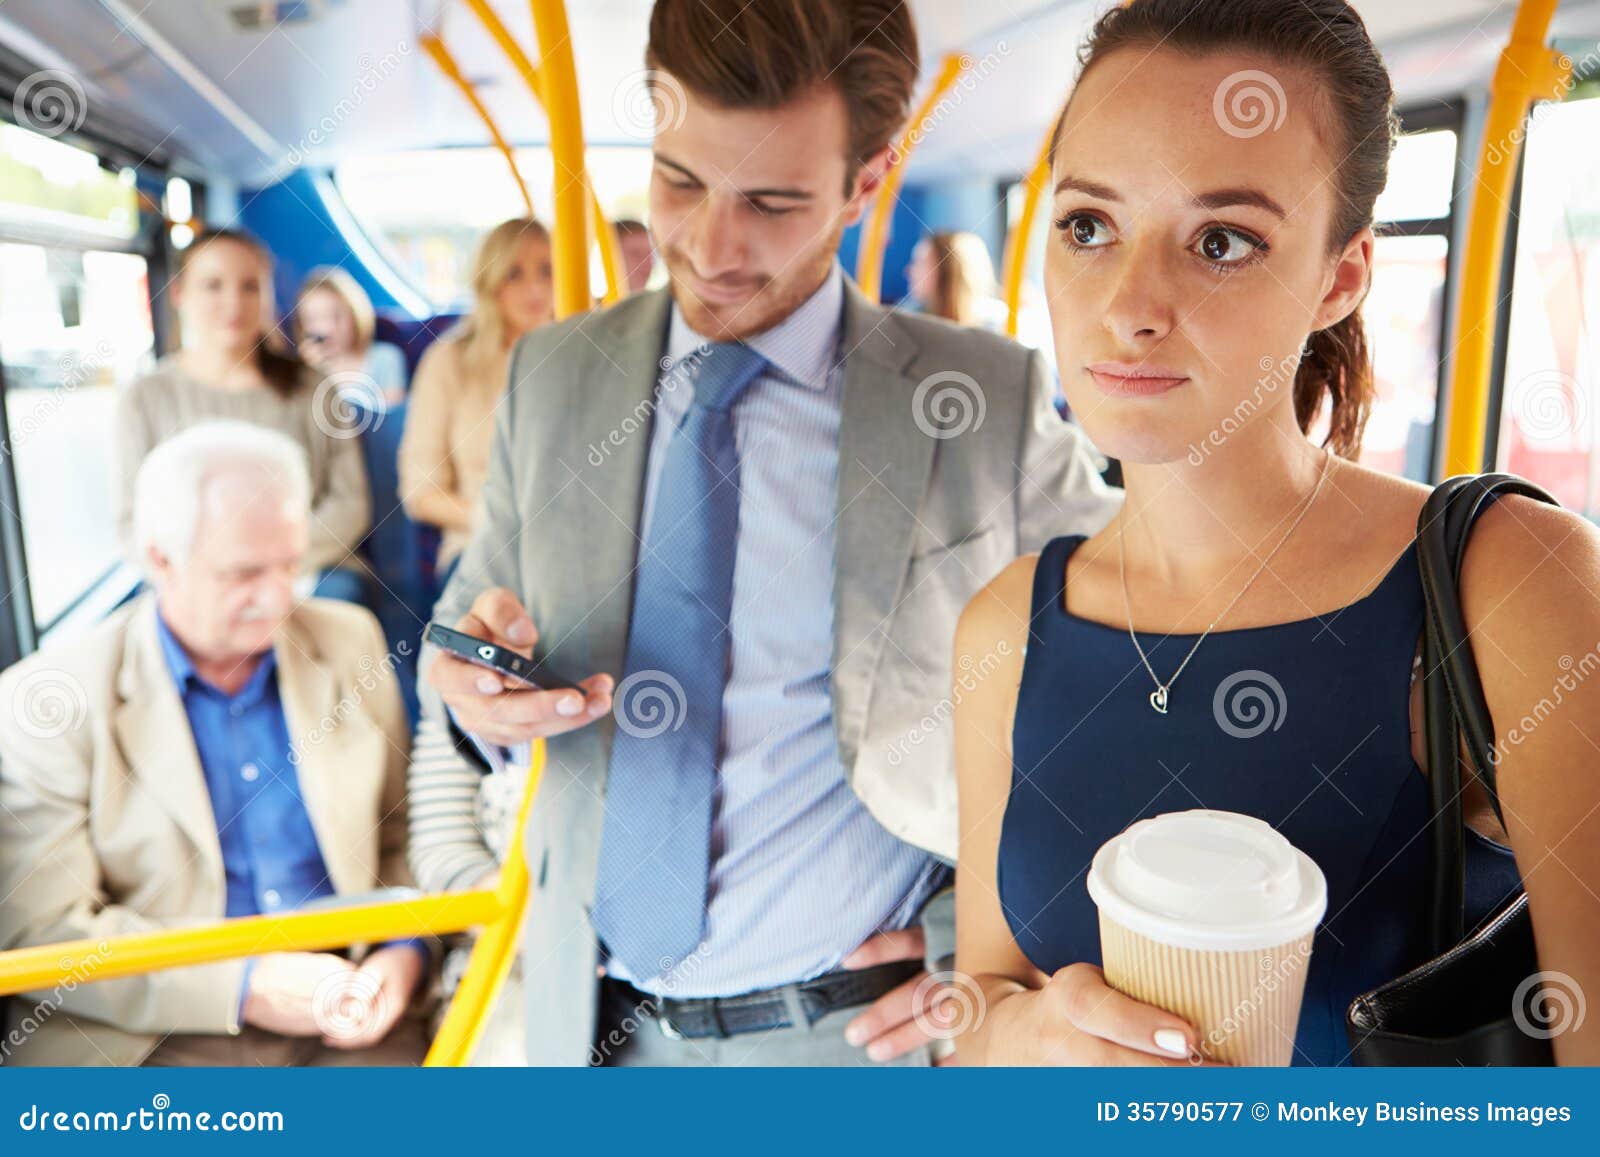 passengers standing on busy commuter bus